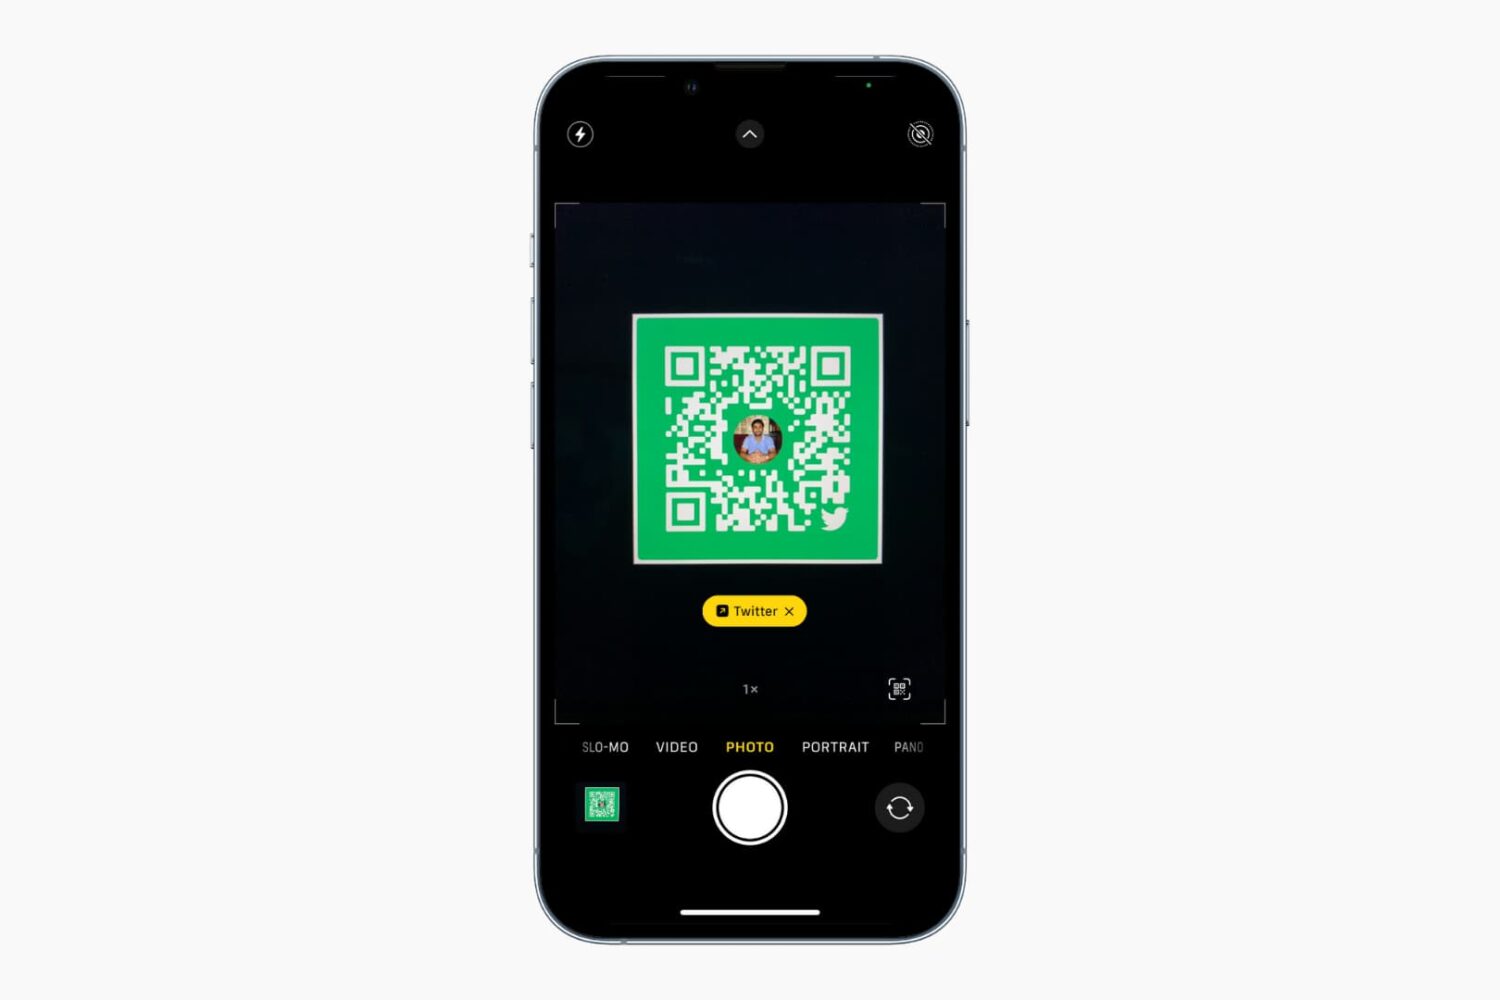 iPhone showing how to scan QR code using the Camera app